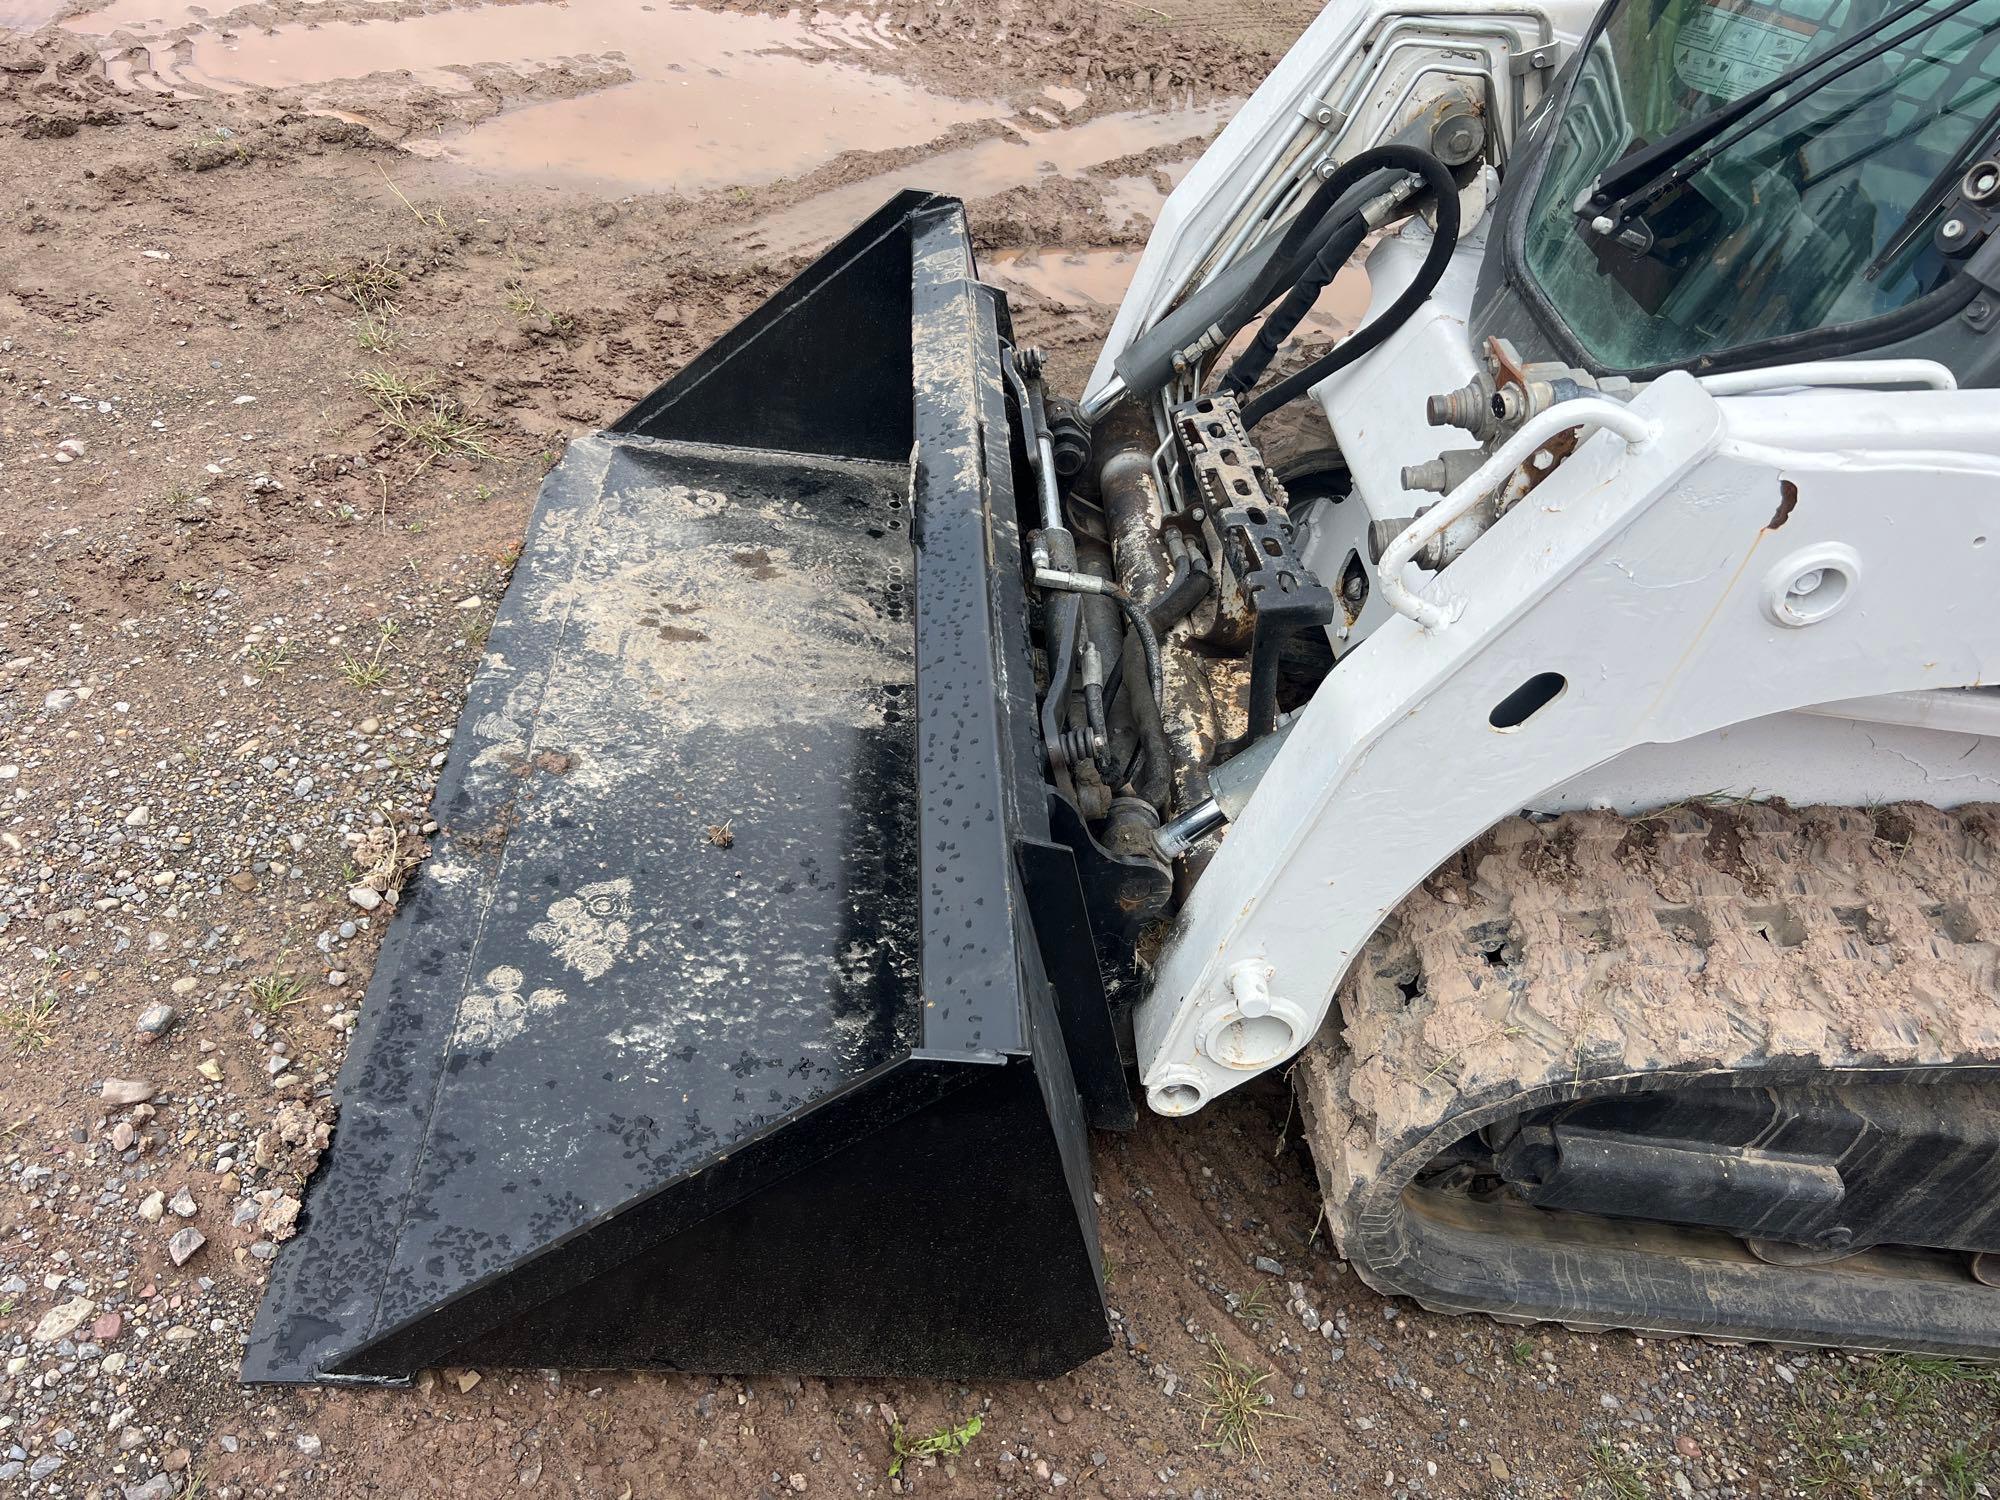 2016 BOBCAT T450 RUBBER TRACKED SKID STEER SN:AUVP12884 powered by diesel engine, equipped with